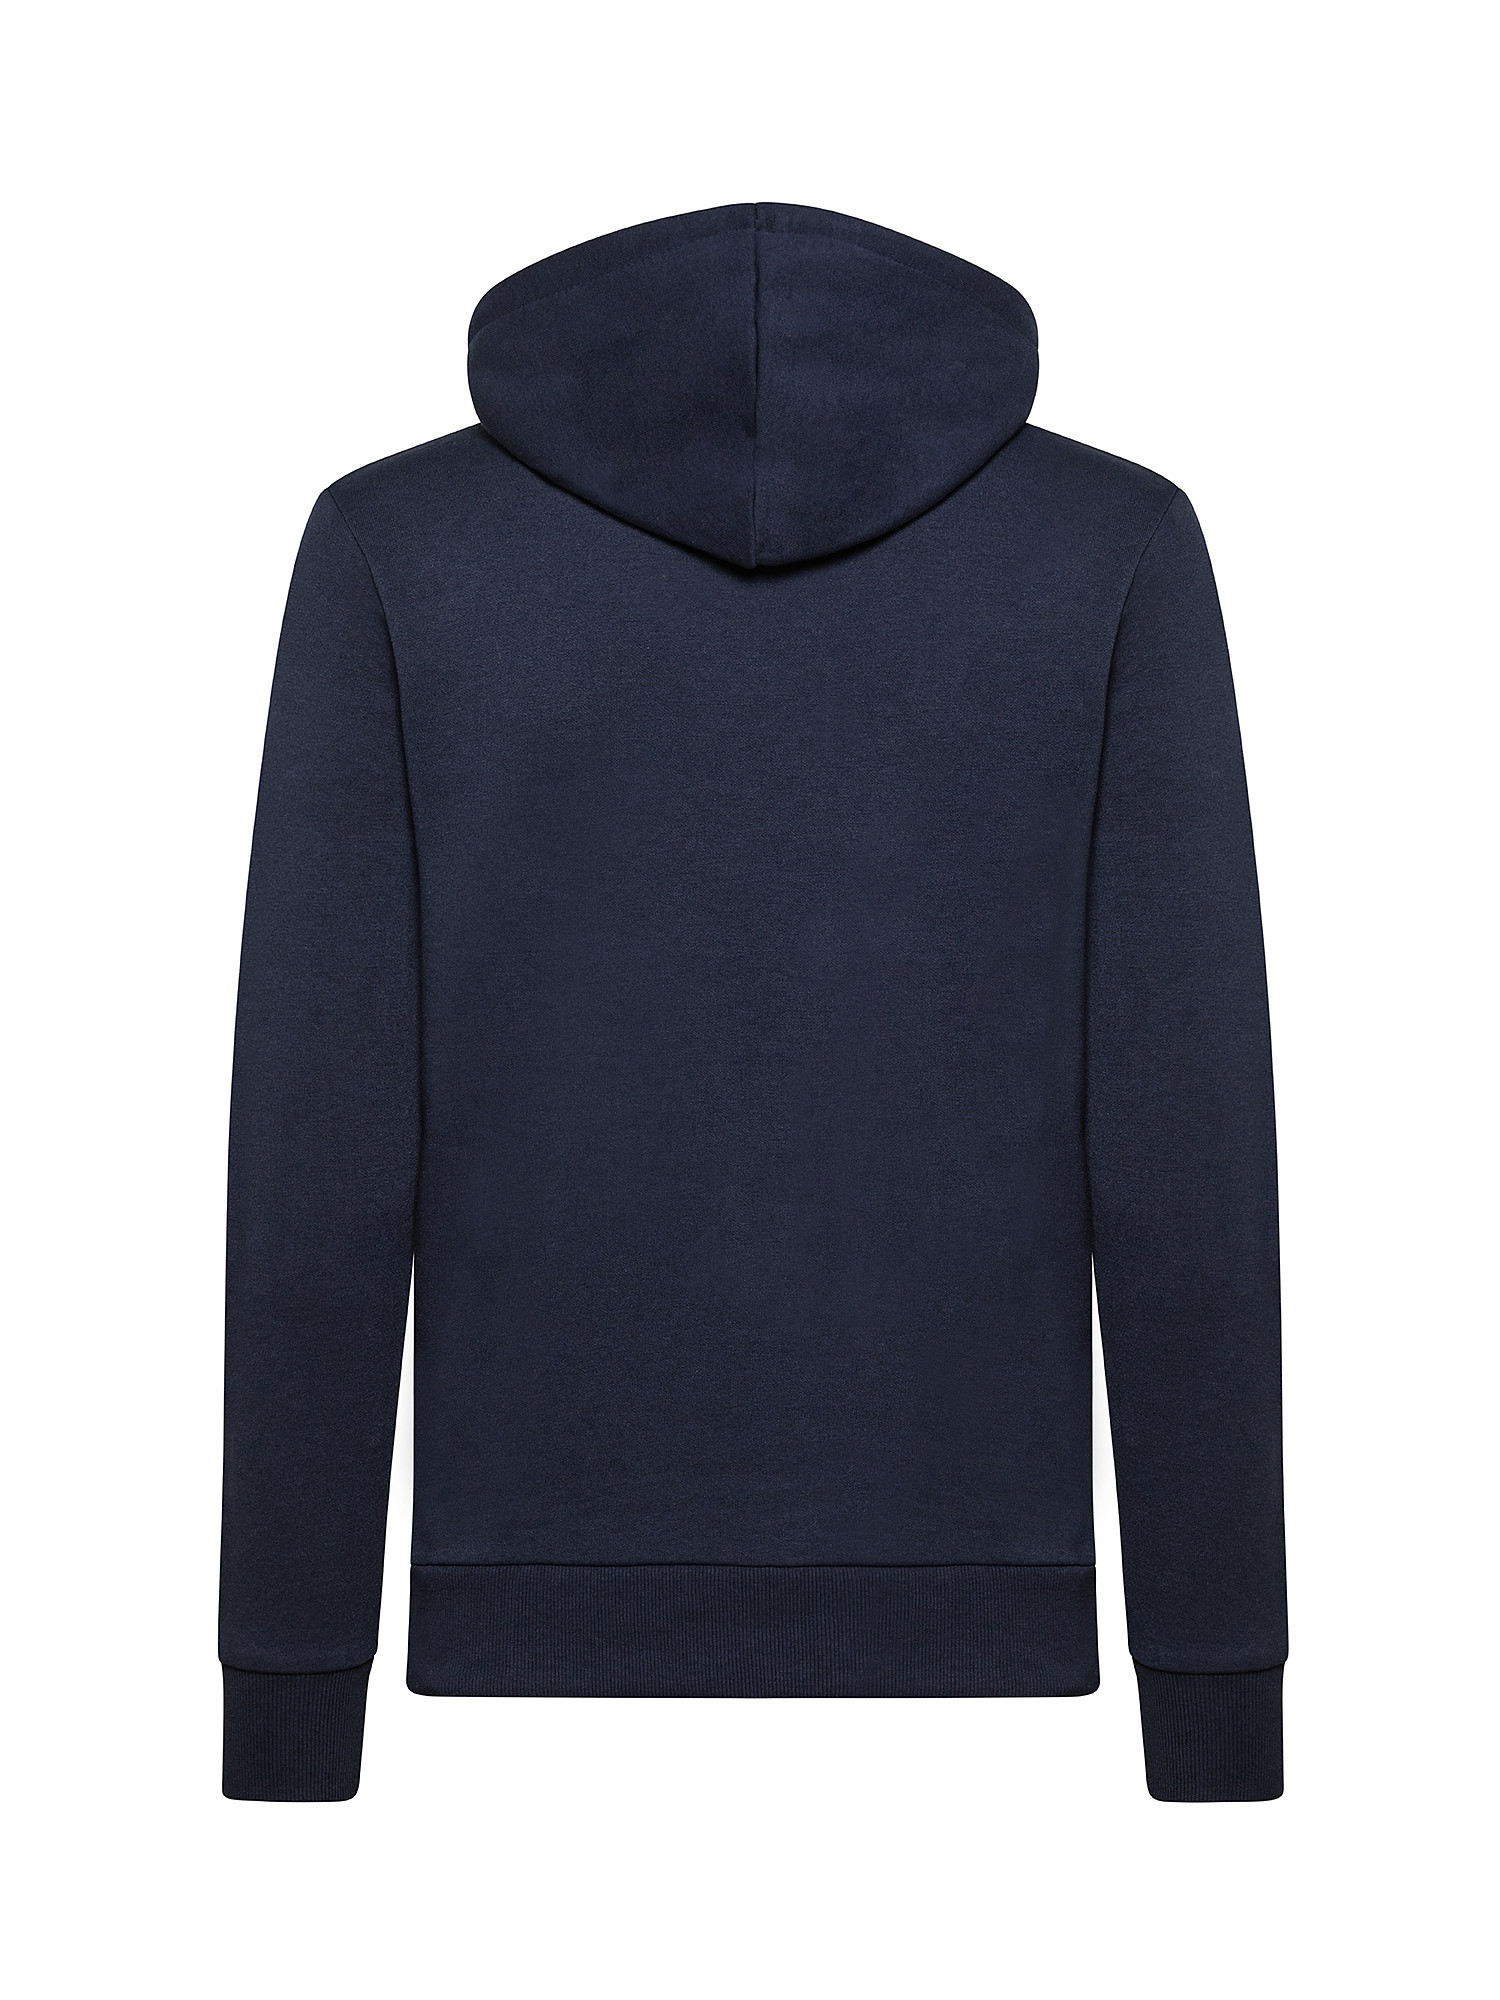 Sweatshirt with hood and long sleeves, Blue, large image number 1